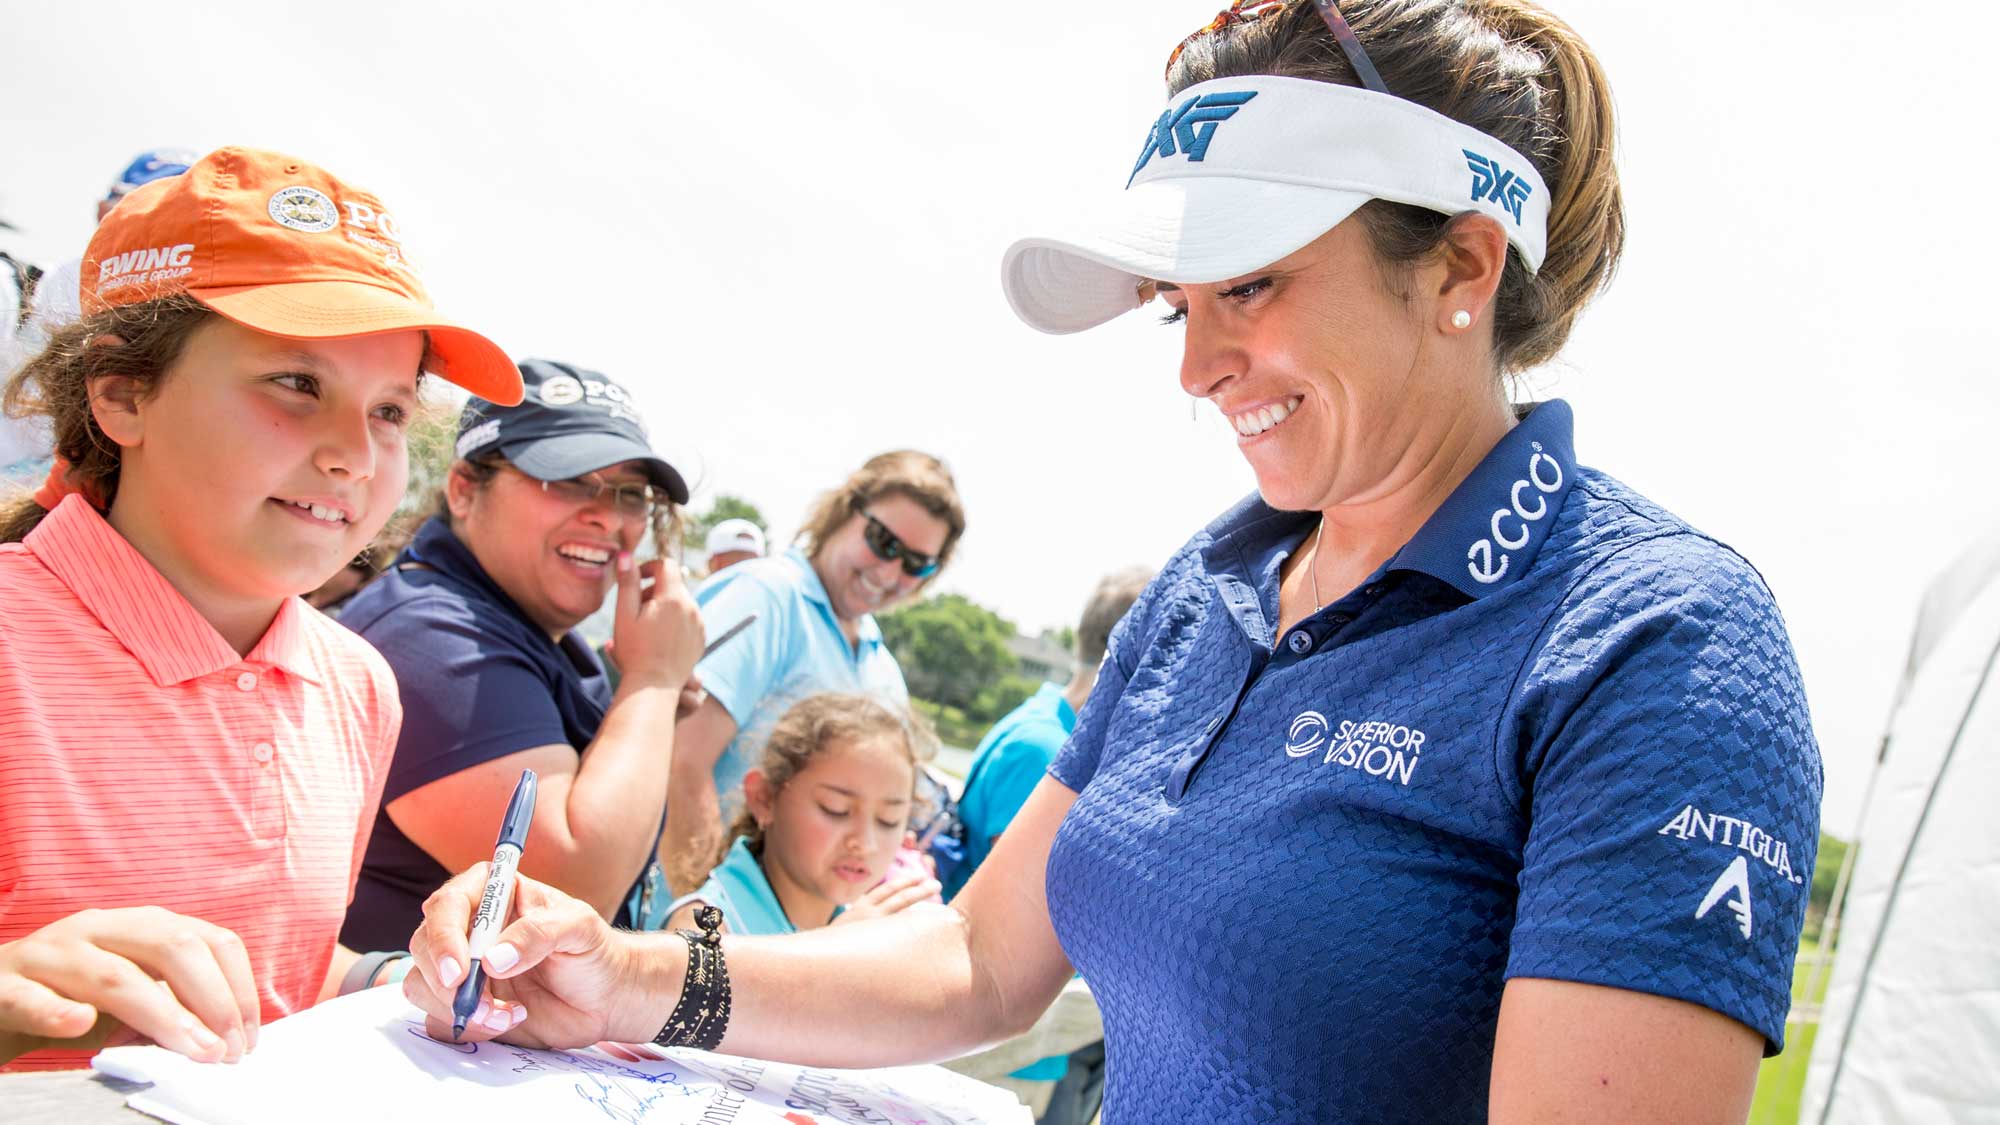 Gerina Piller of the United States signs autographs following the second round of the Volunteers of America Texas Shootout